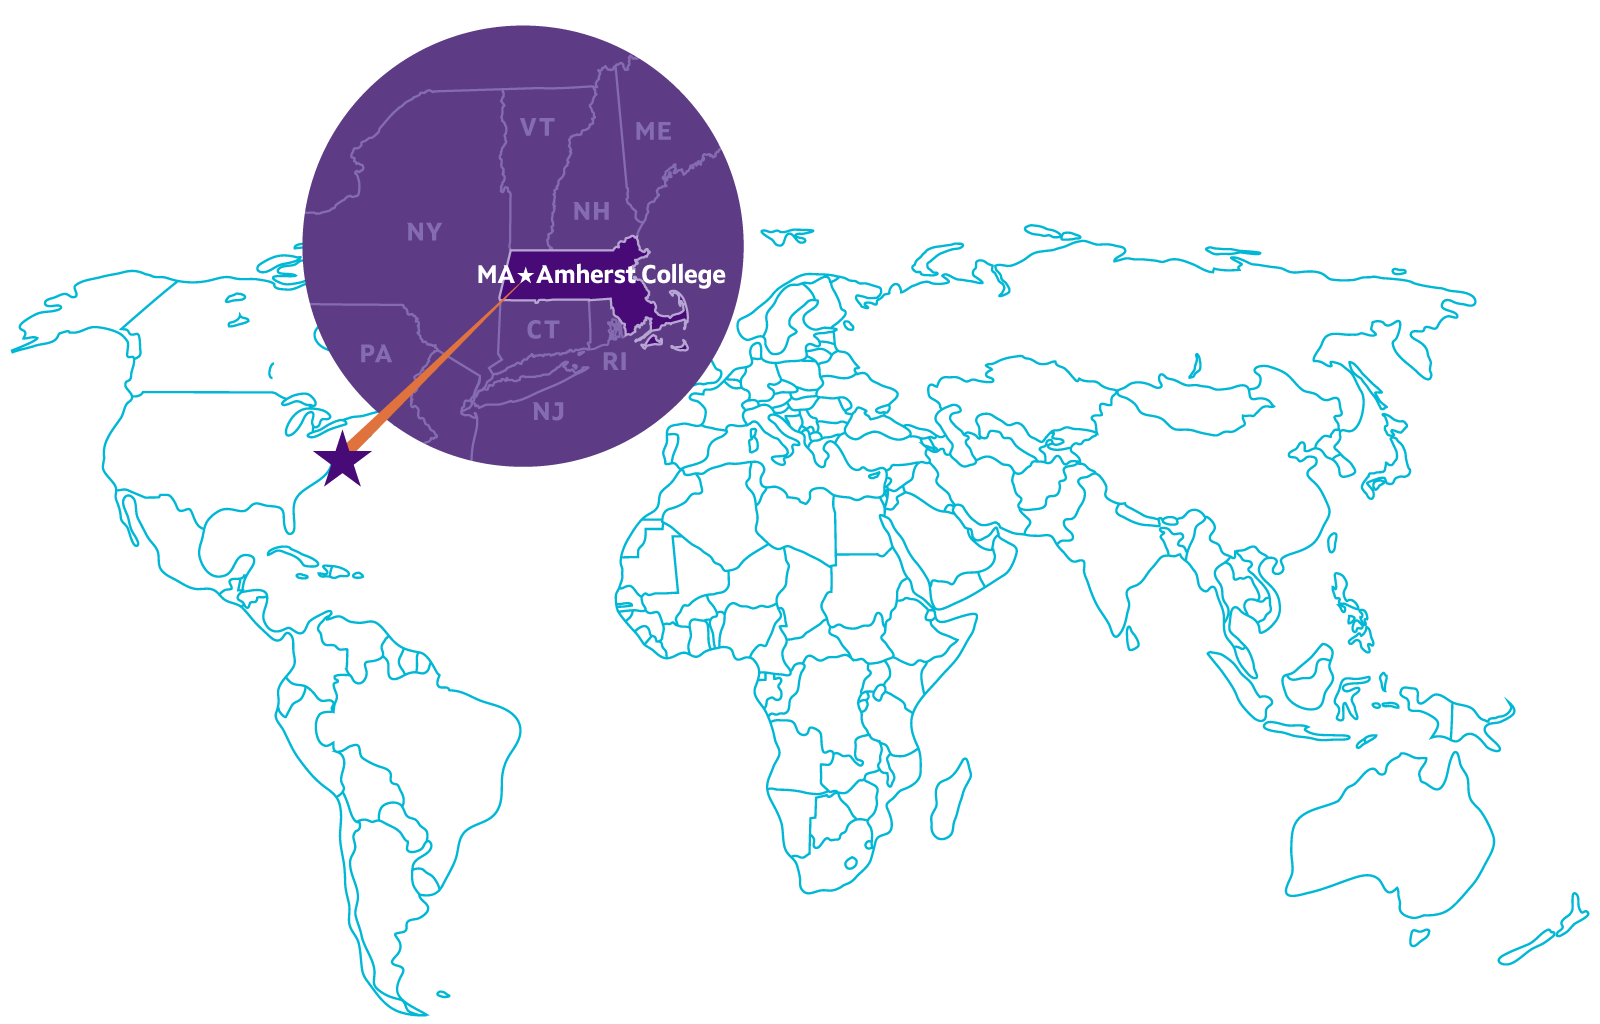 Massachusetts and Amherst College on world map